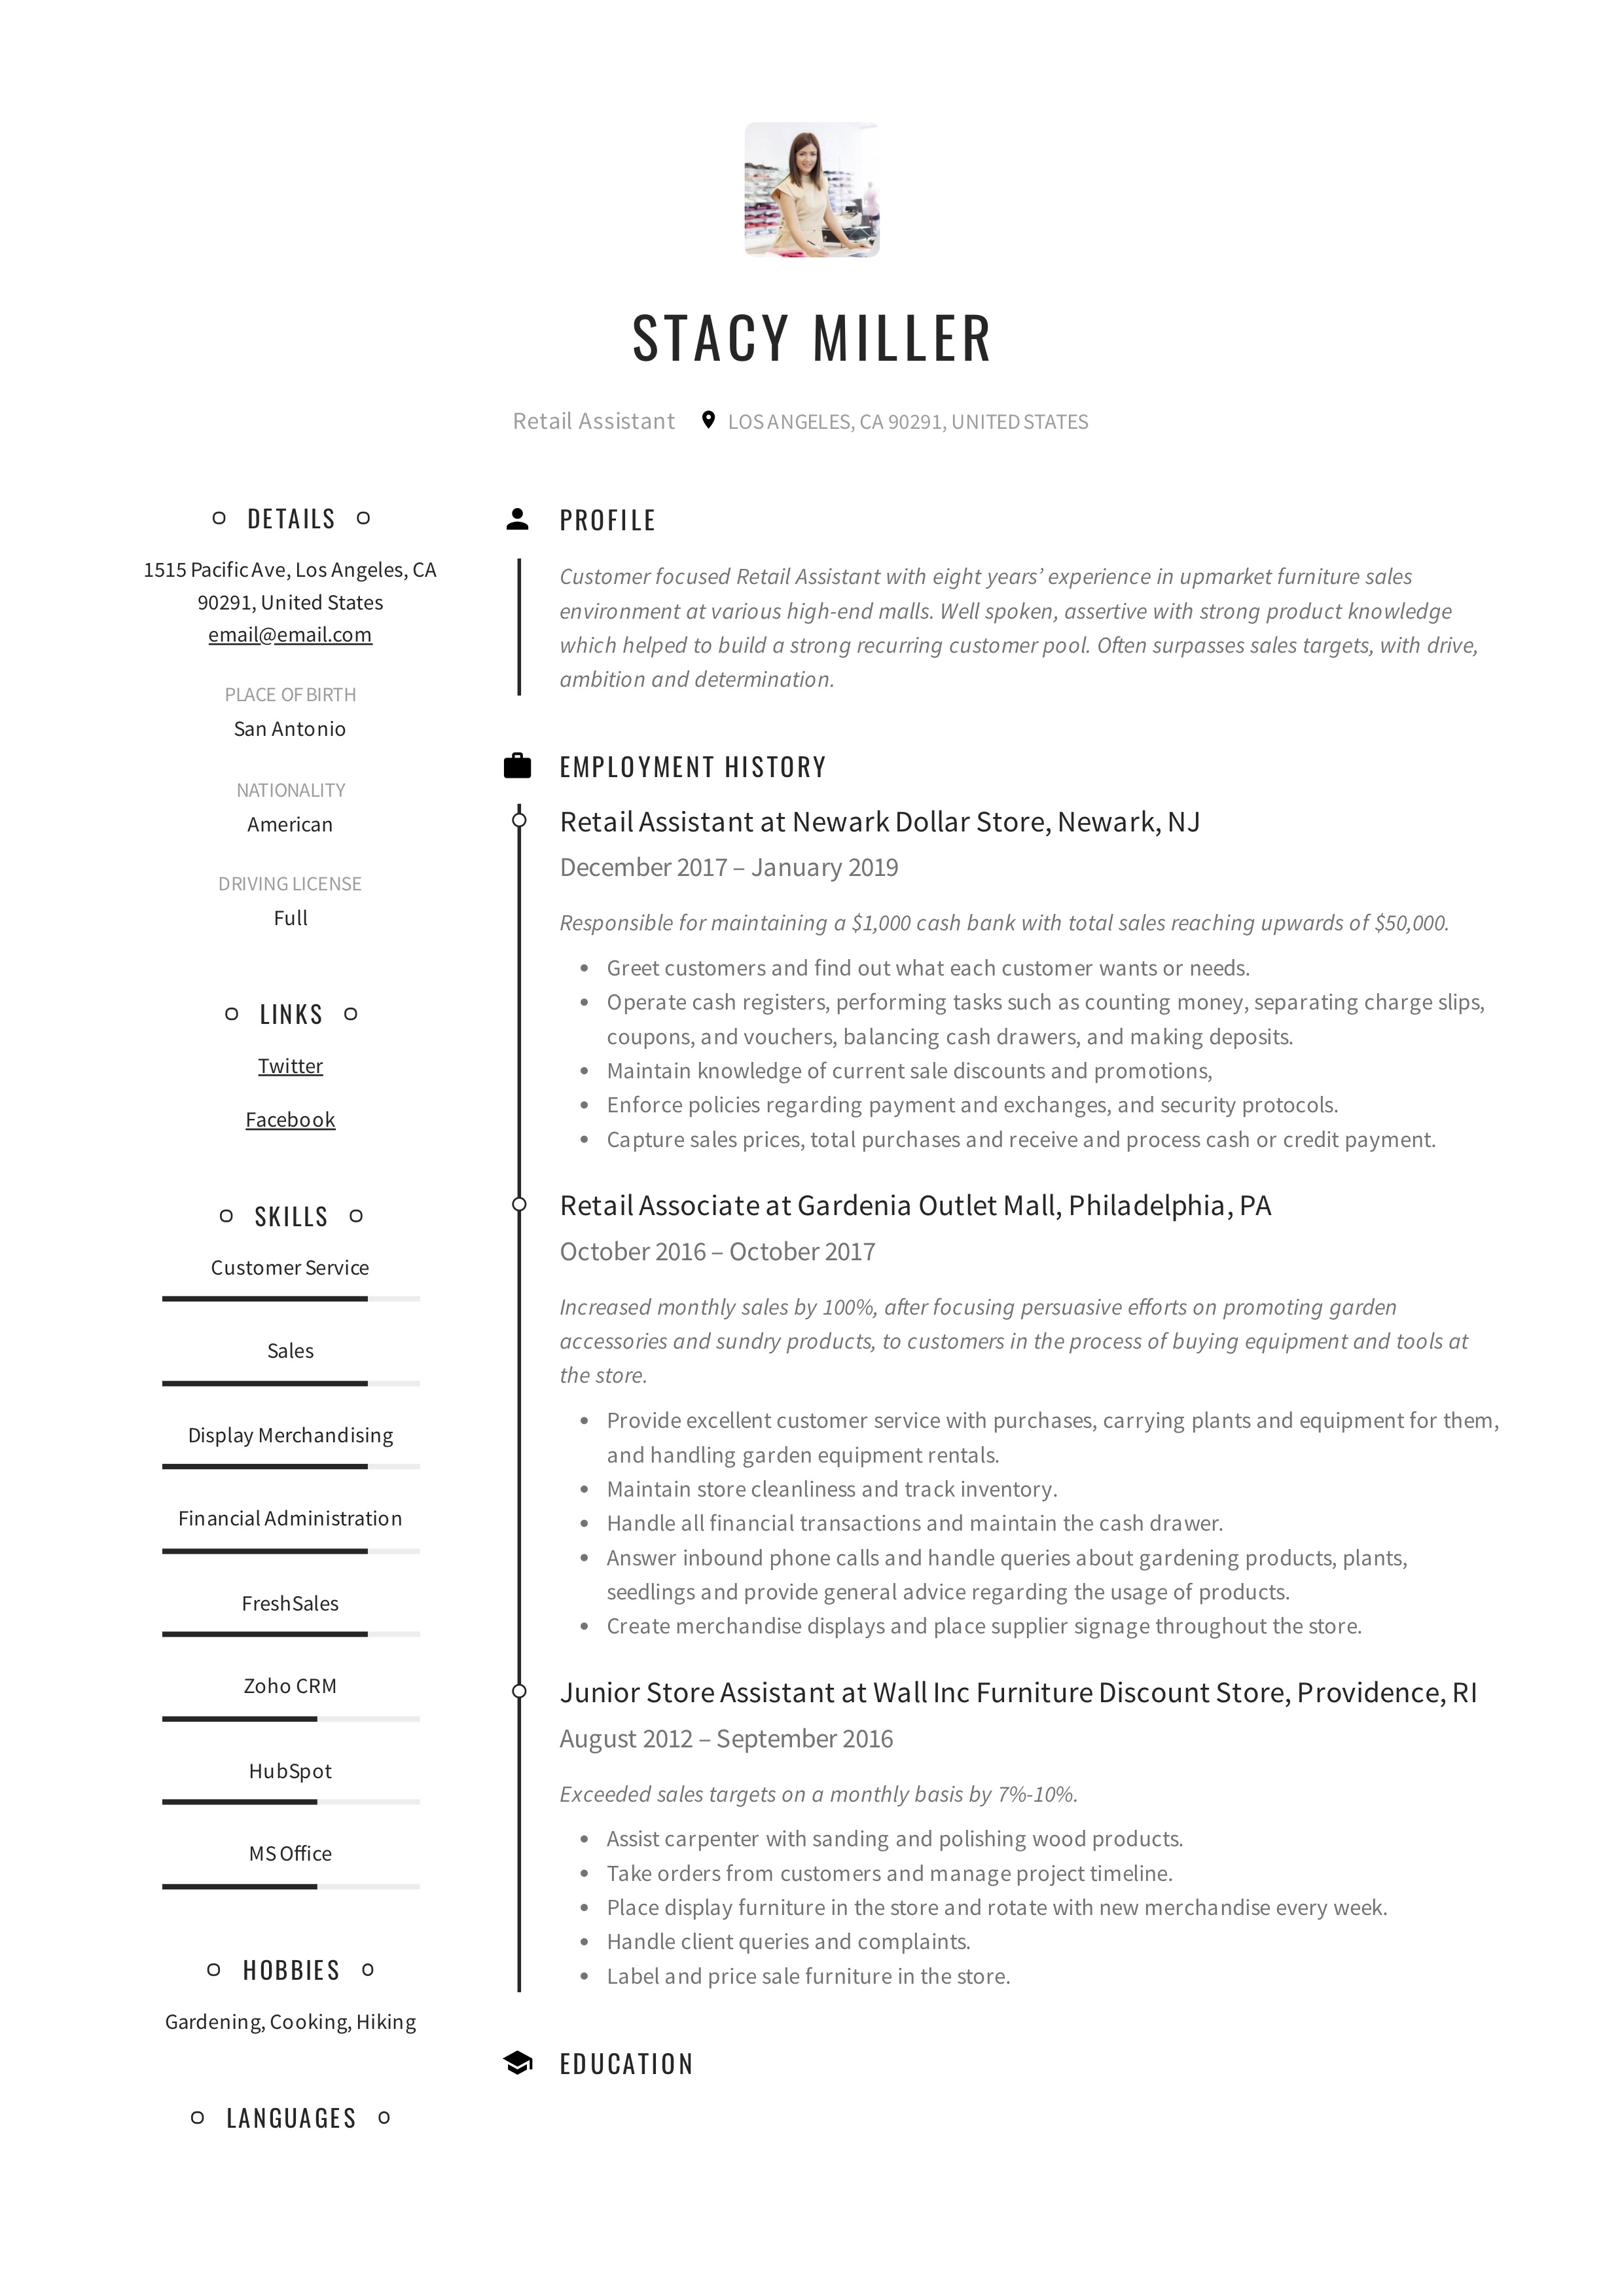 Resume Retail Assistant